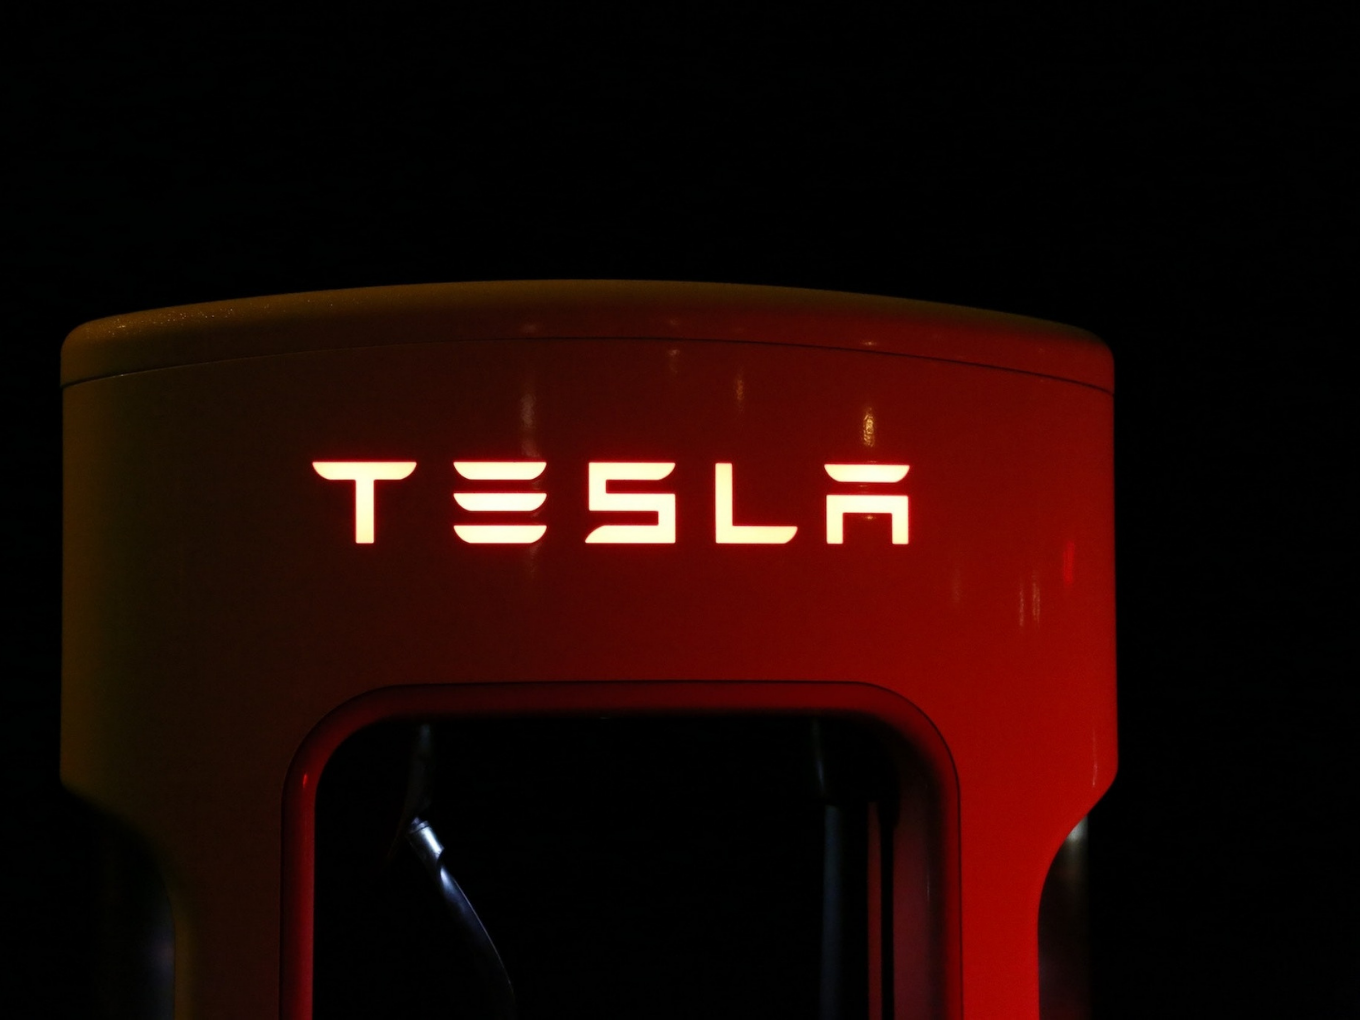 India has rejected Elon Musk's request for a tax rebate on Tesla's electric cars citing enough traction from global automakers within the existing framework.